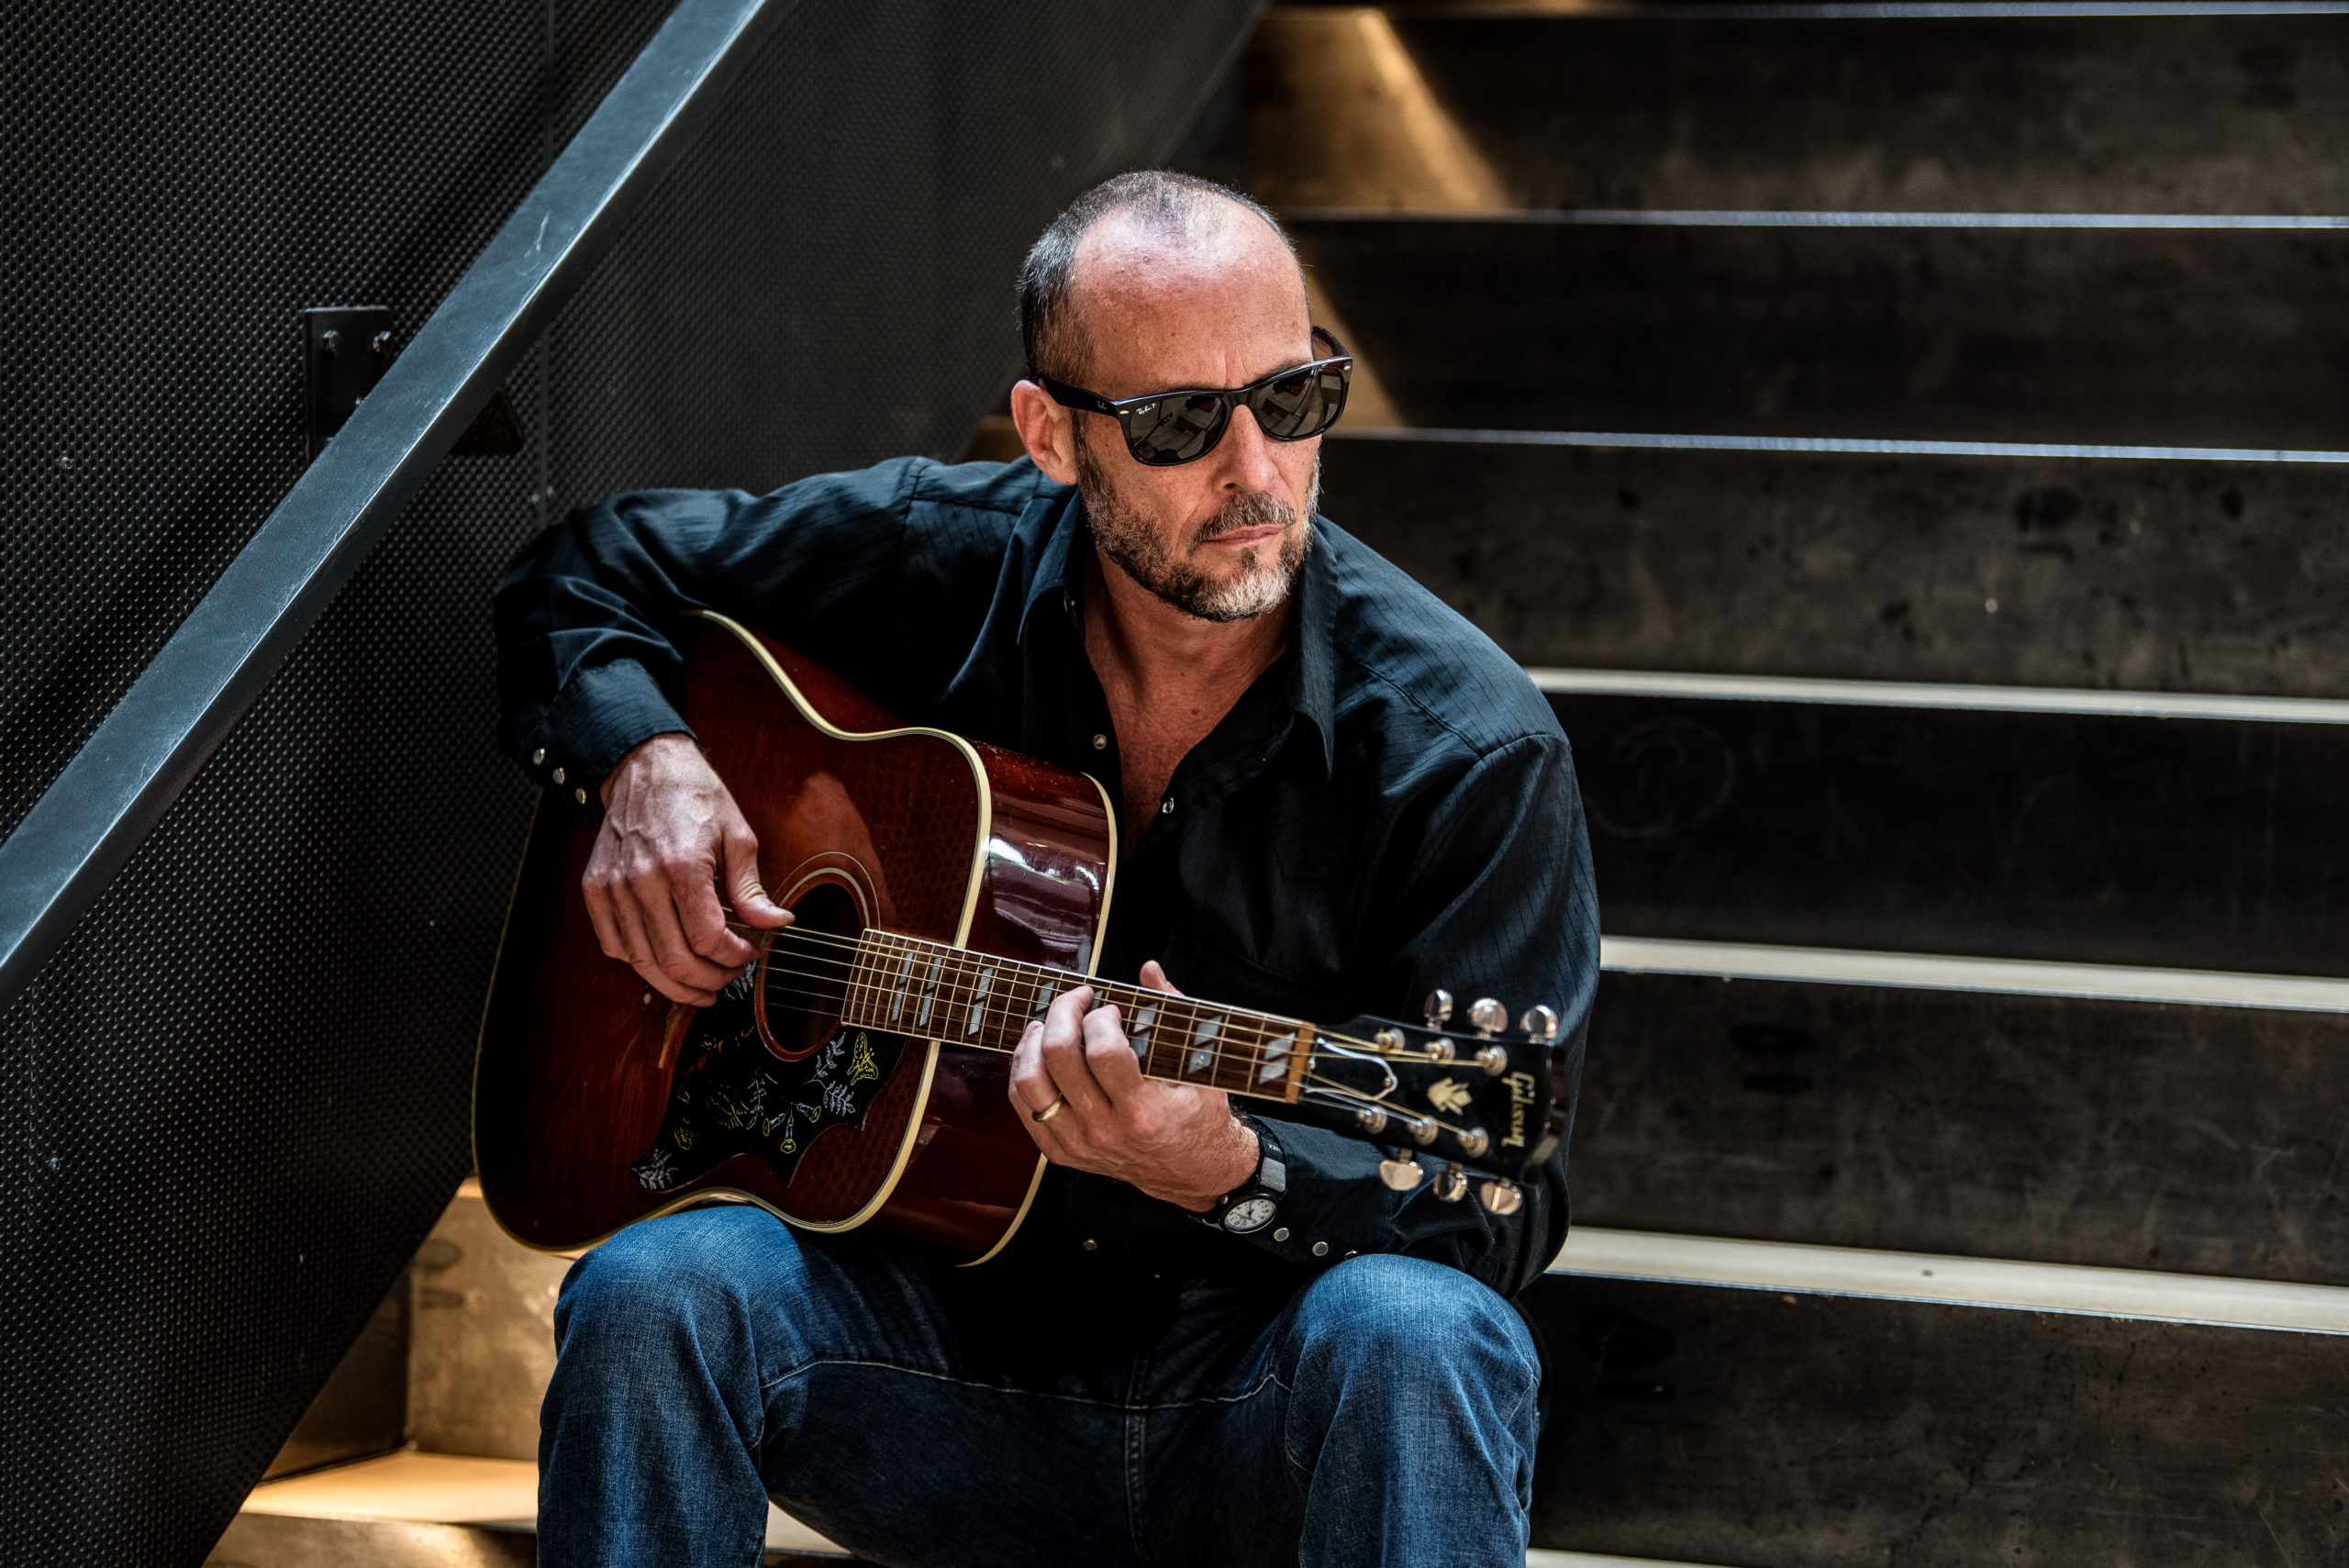 Paul Thorn to Showcase AcousticHeavy "Never Too Late to Call" in the